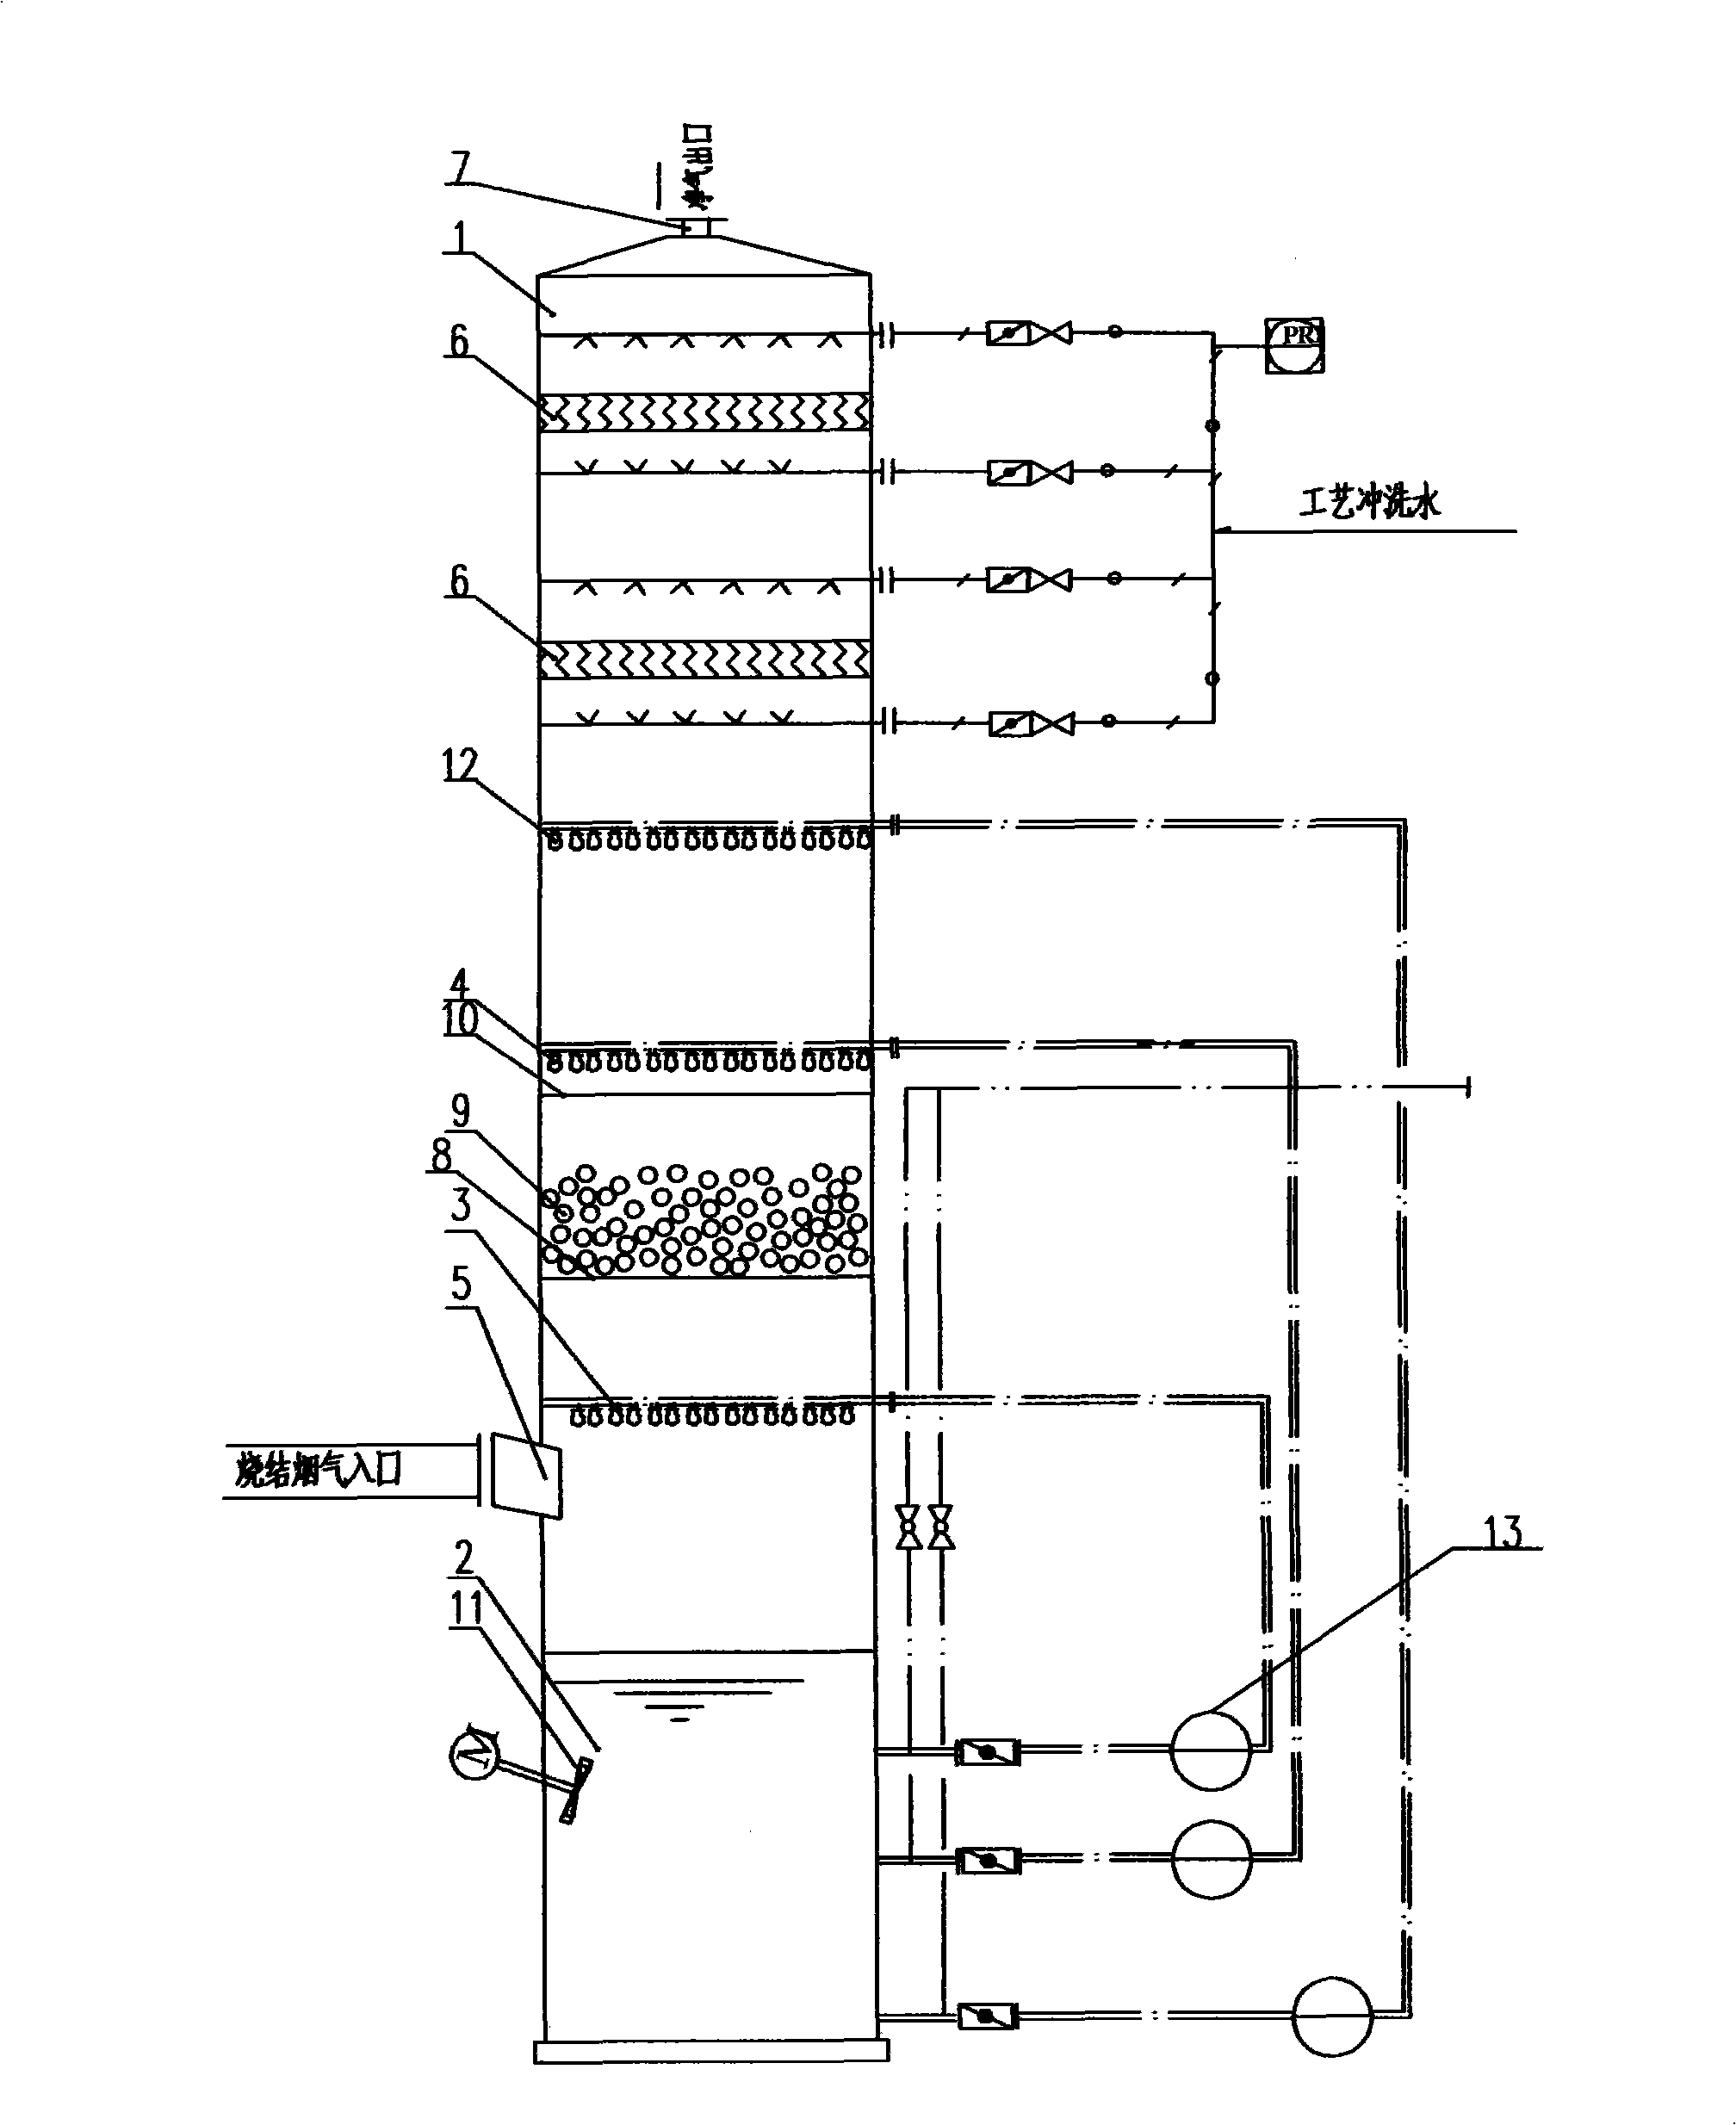 Desulfurizing tower for wet fuel gas desulfurizing system